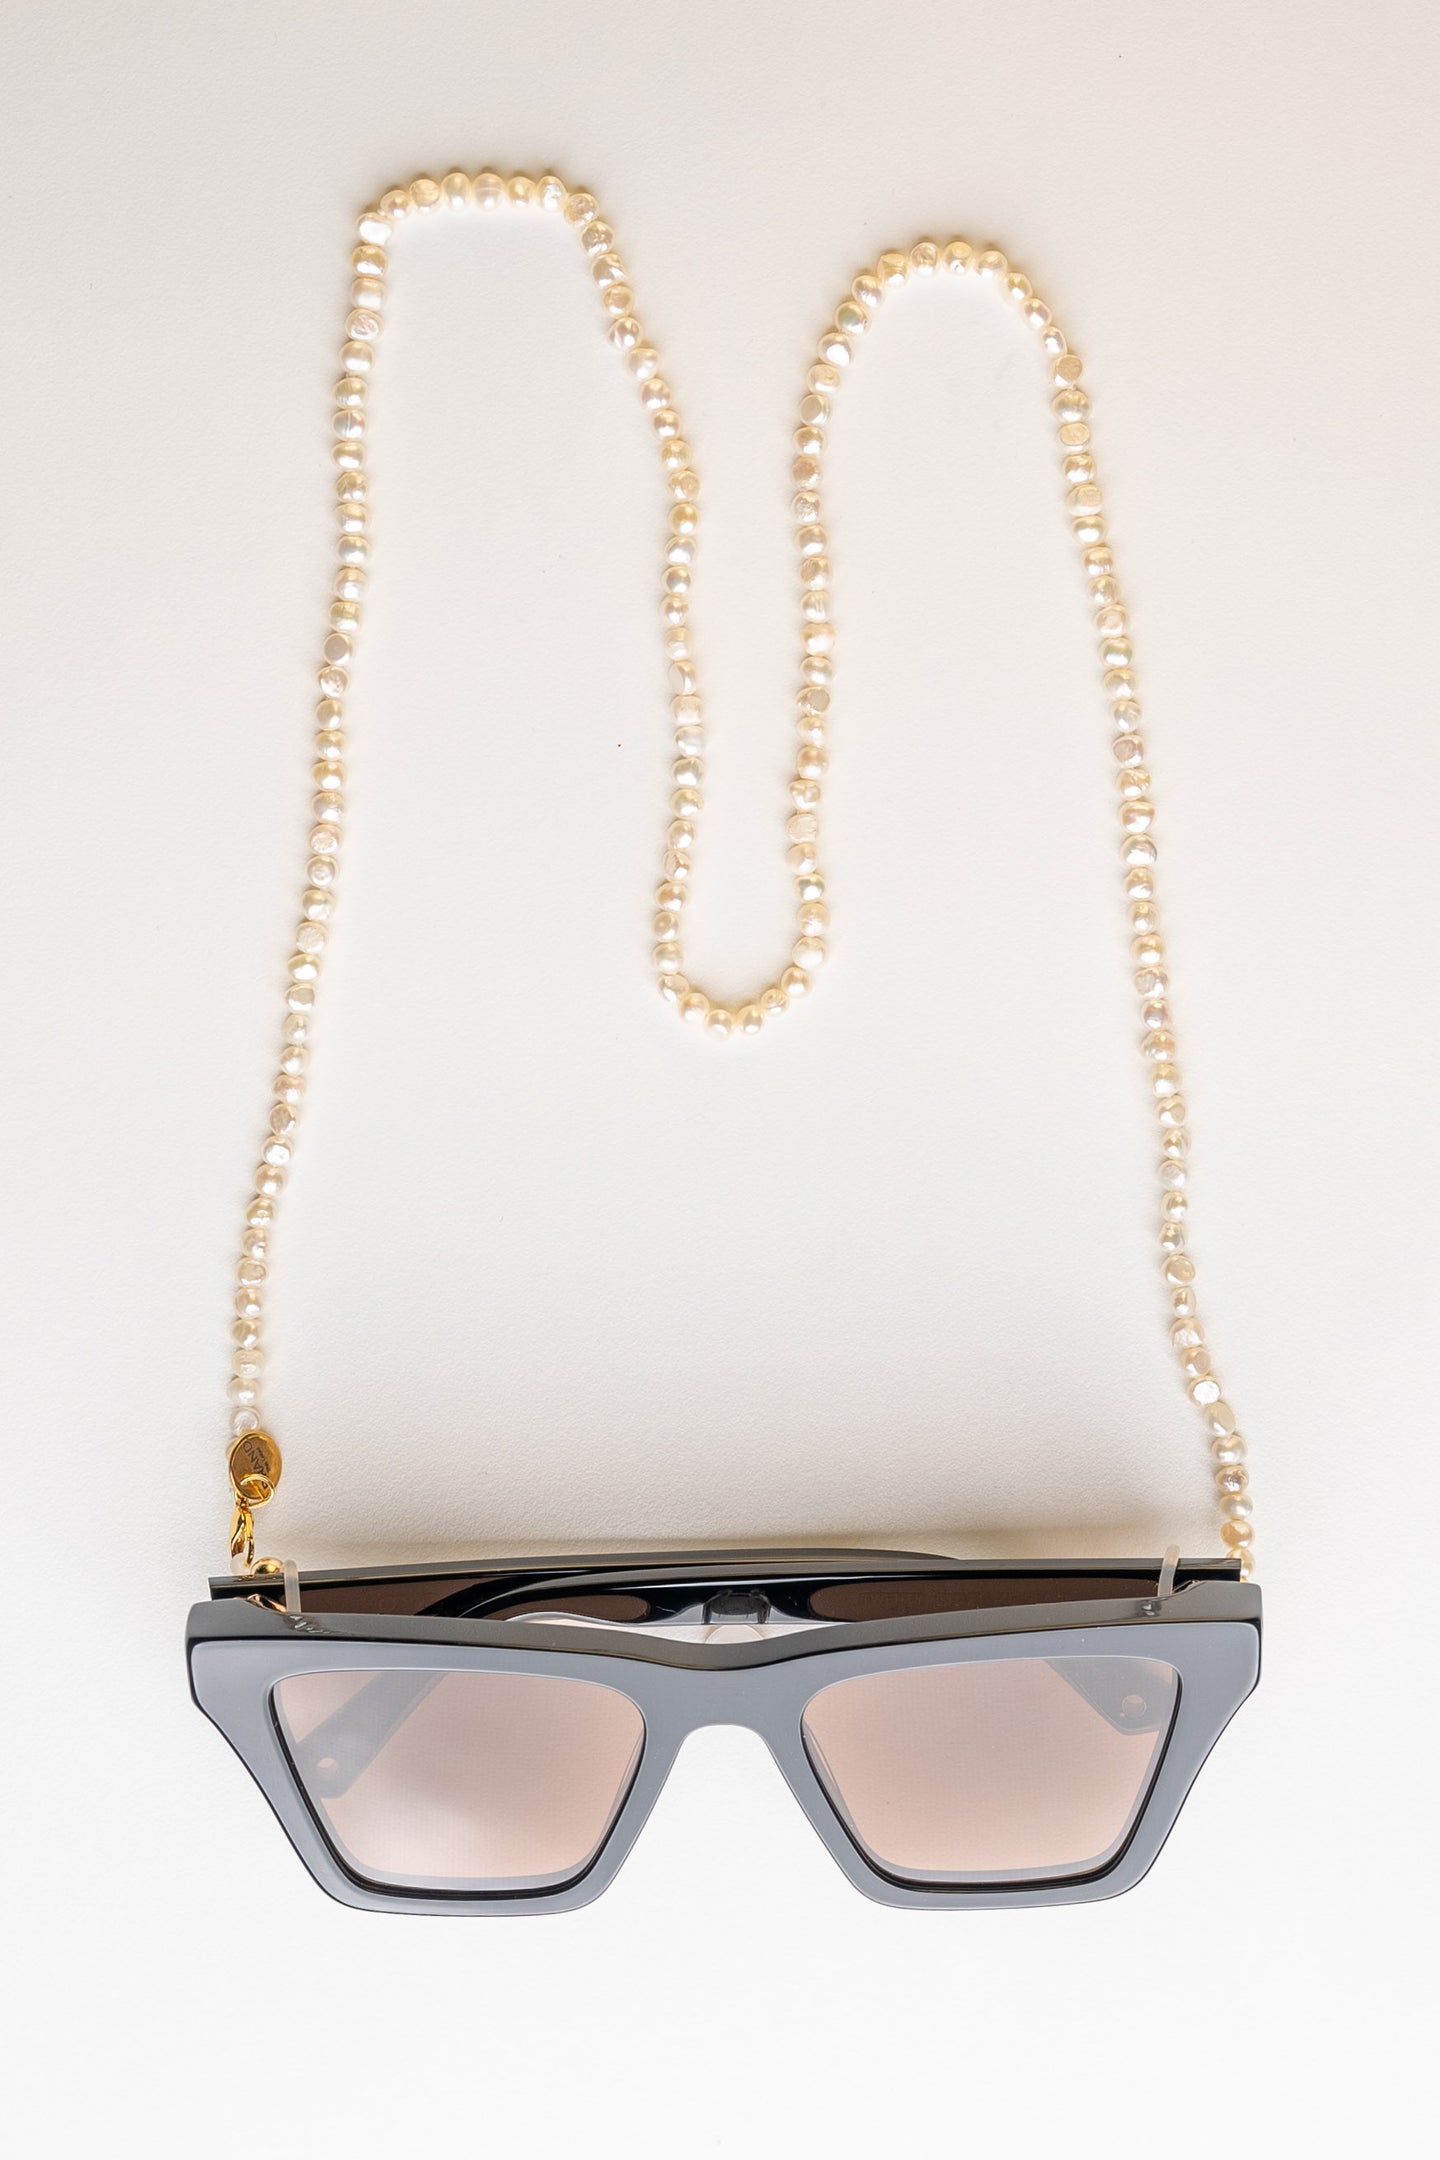 BRAND. The Label Frame chain in natural freshwater pearl. Pictures in the Ivory colour with gold hardware. Can be used as a frame chain or sunglass chain to protect your eyewear. A unique piece from BRAND. The Label resort wear collection. 